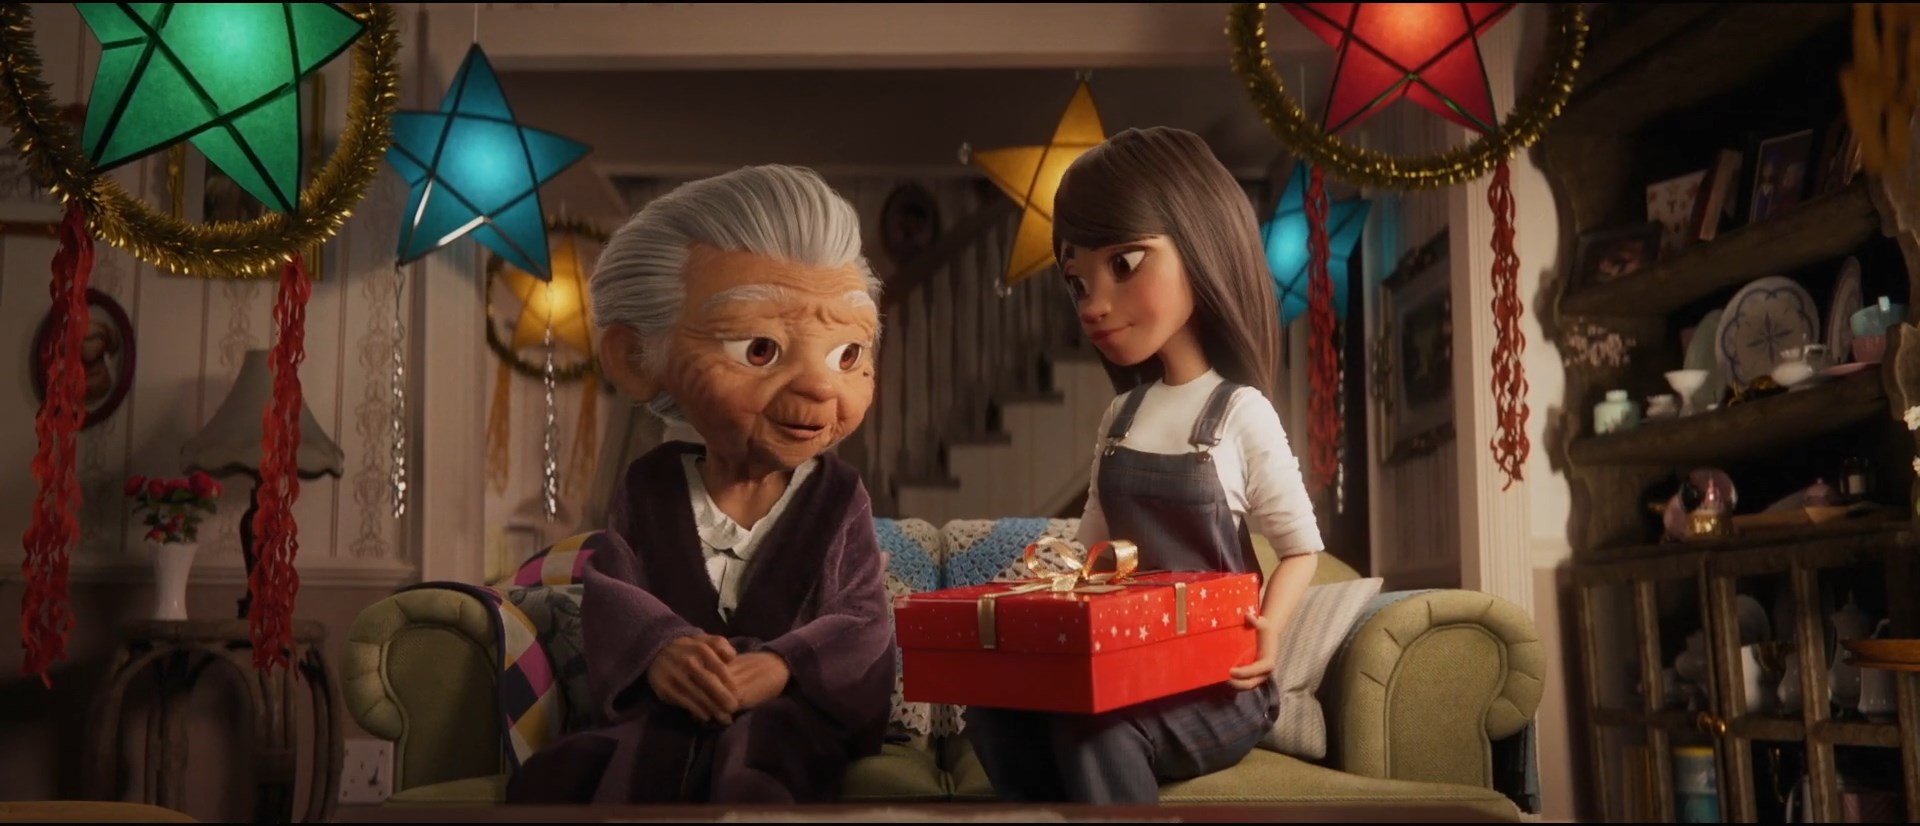 The grandmother and granddaughter sitting next to each other. Surrounded by star paper lanterns, granddaughter holding a present